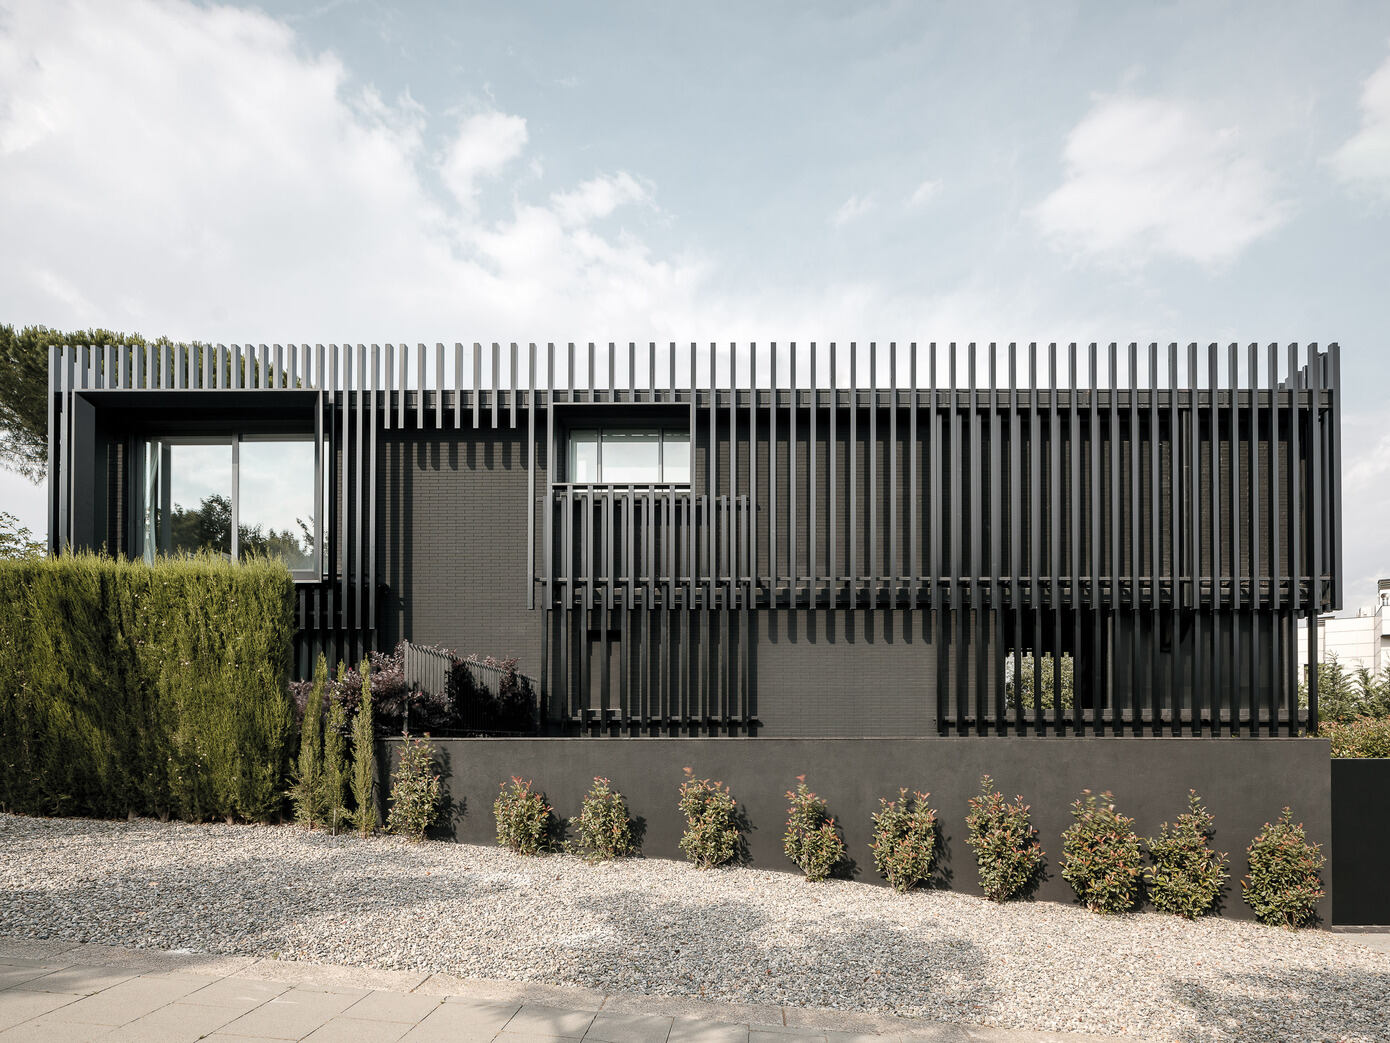 Black House: A Striking Example of Contemporary Design